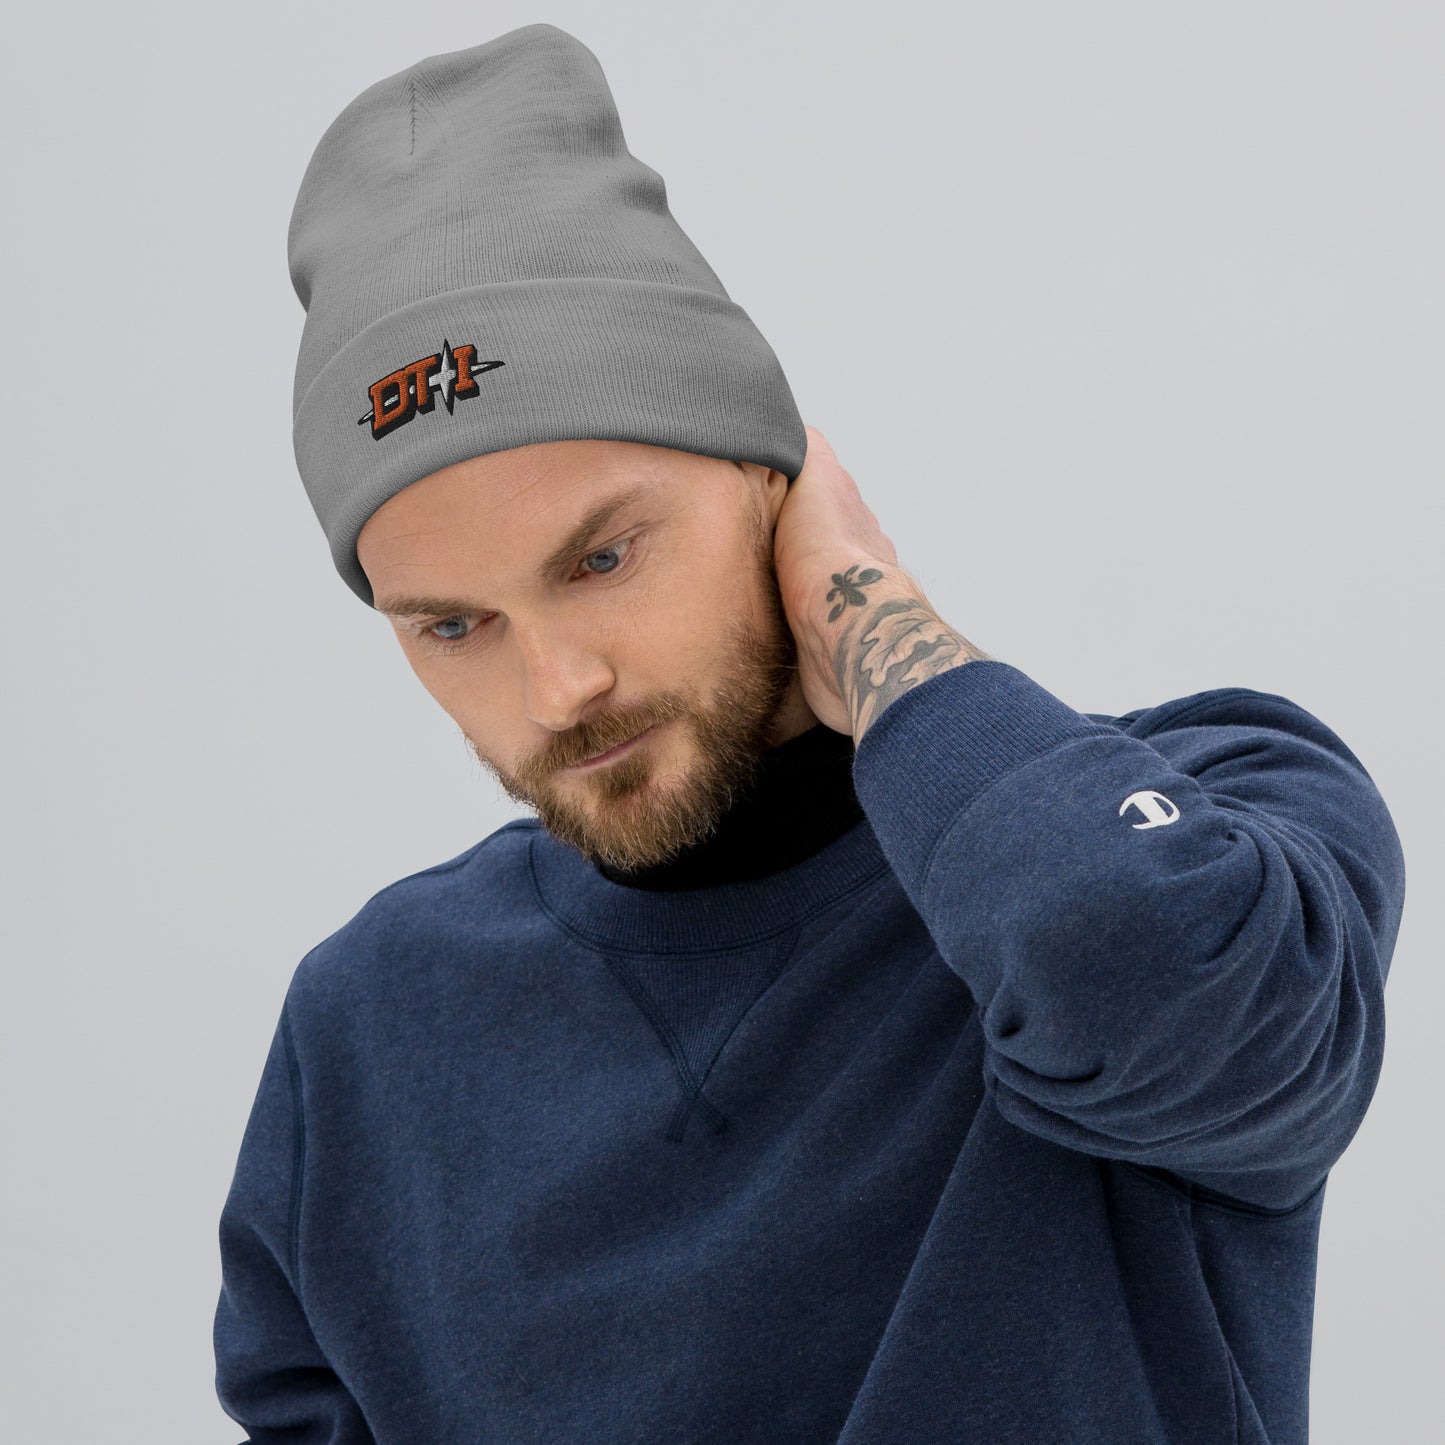 DTI STAR Embroidered Beanie